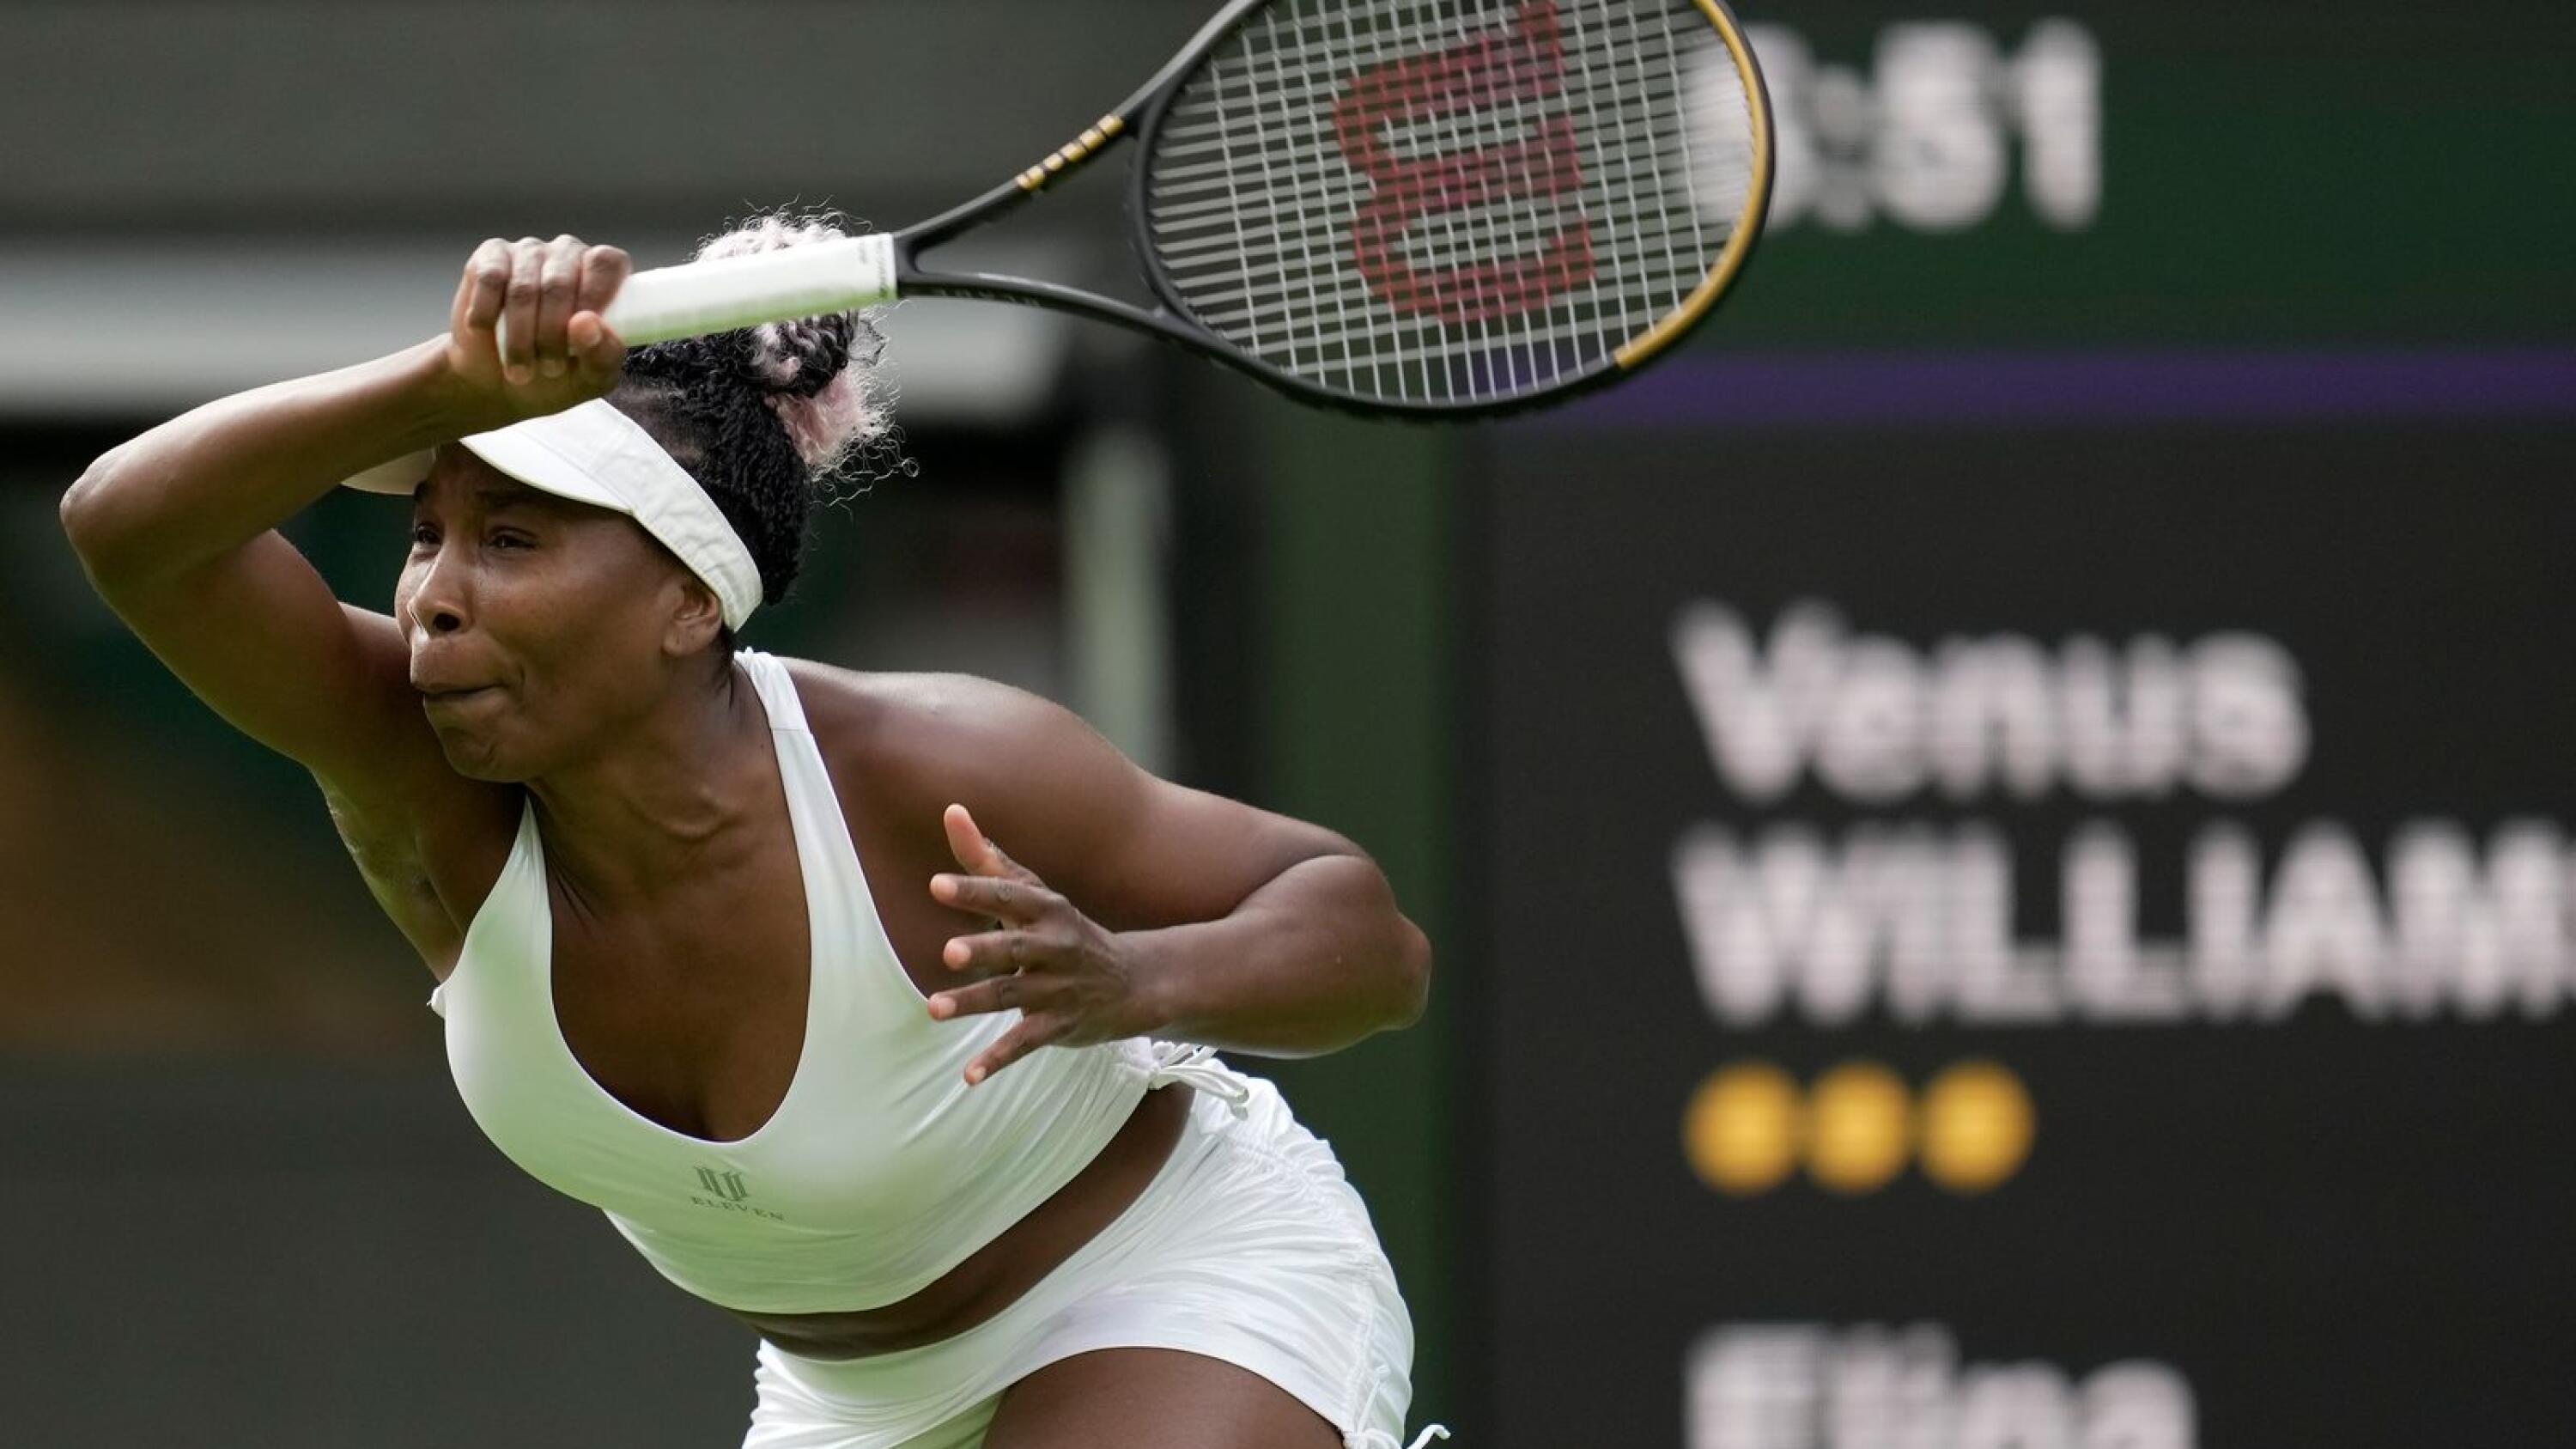 Venus Williams is back at Wimbledon at age 43 and ready to play on